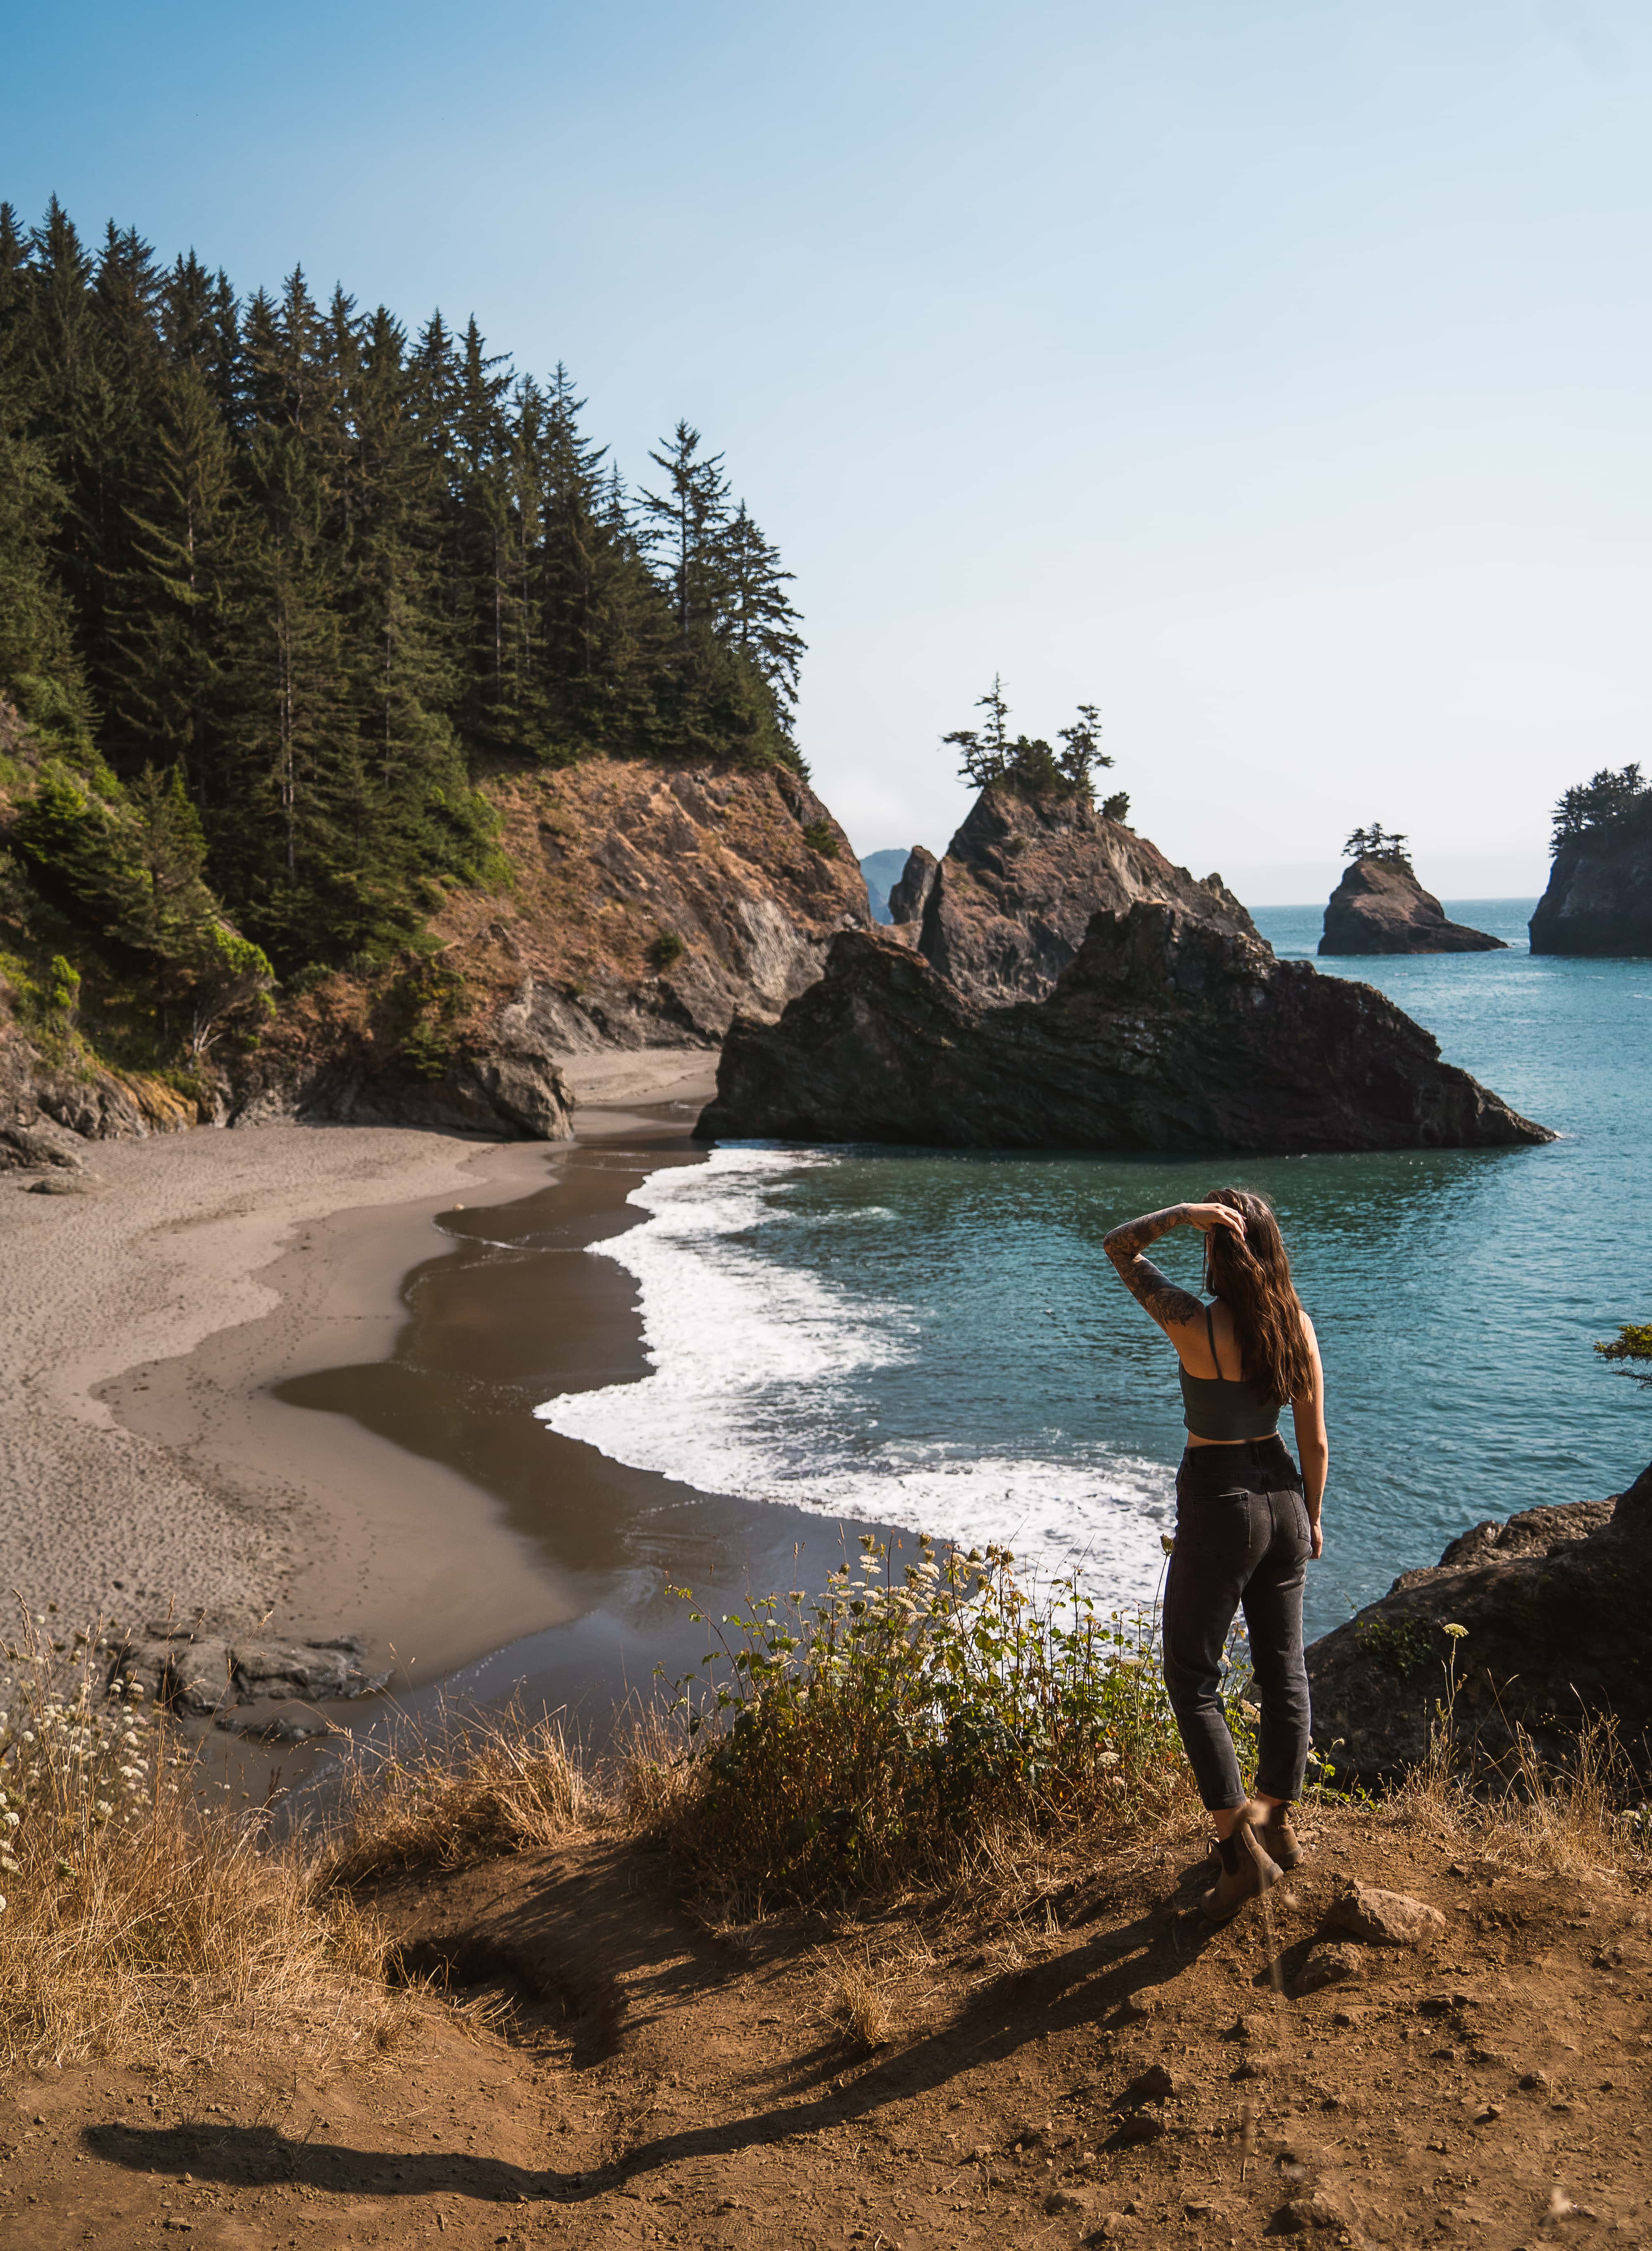 a stunning view of secret beach on the oregon coast - a must for your 10 day oregon road trip itinerary